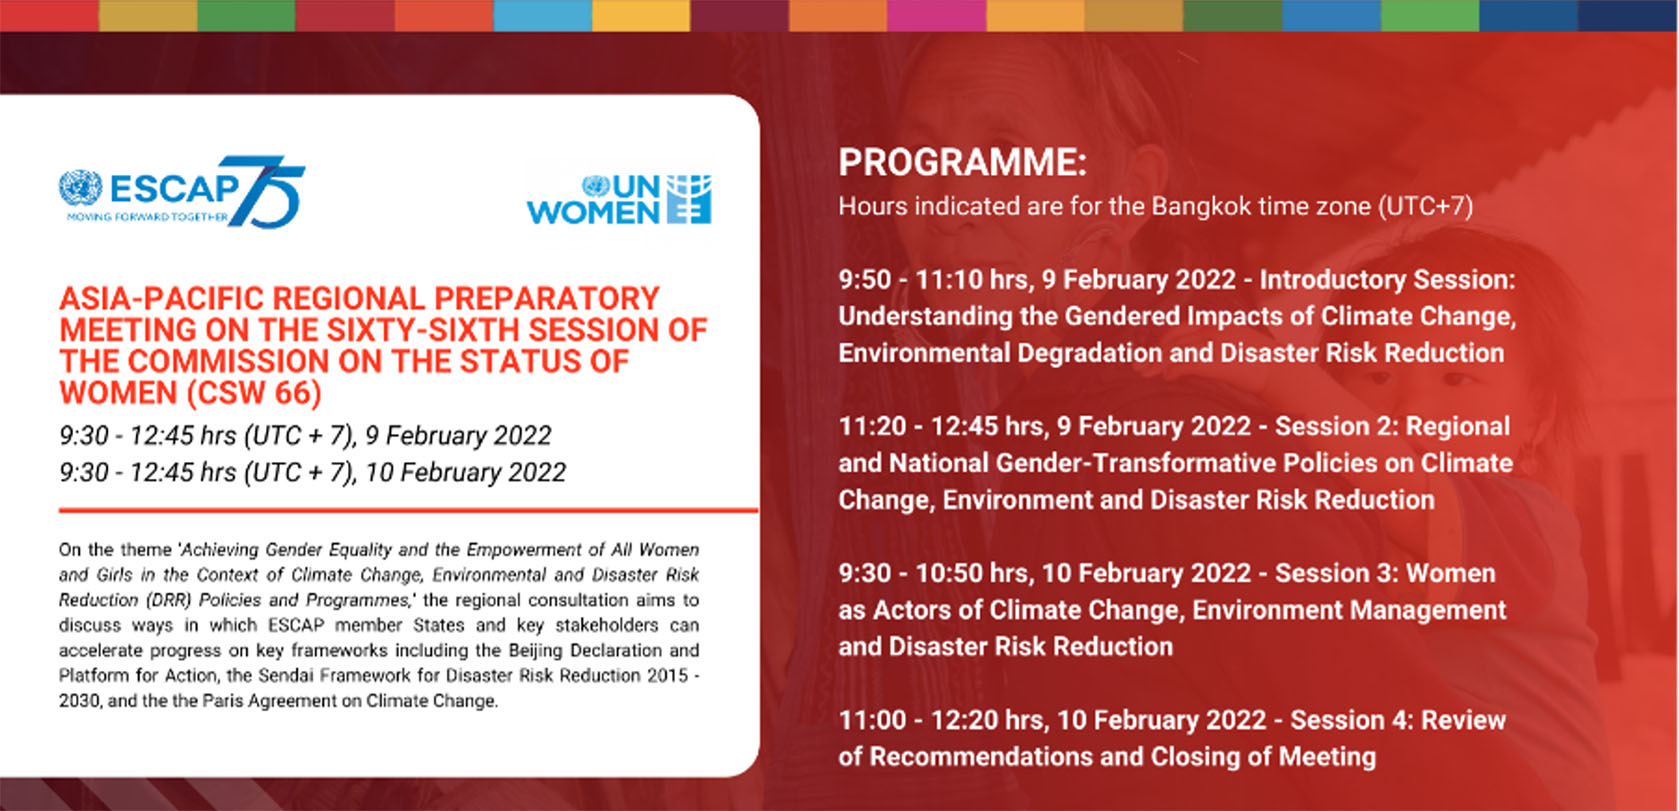 Asia-Pacific Regional Consultation on the priority theme for the 66th session of the Commission on the Status of Women (CSW 66): “Achieving gender equality and the empowerment of all women and girls in the context of climate change, environmental and disaster risk reduction policies and programmes”